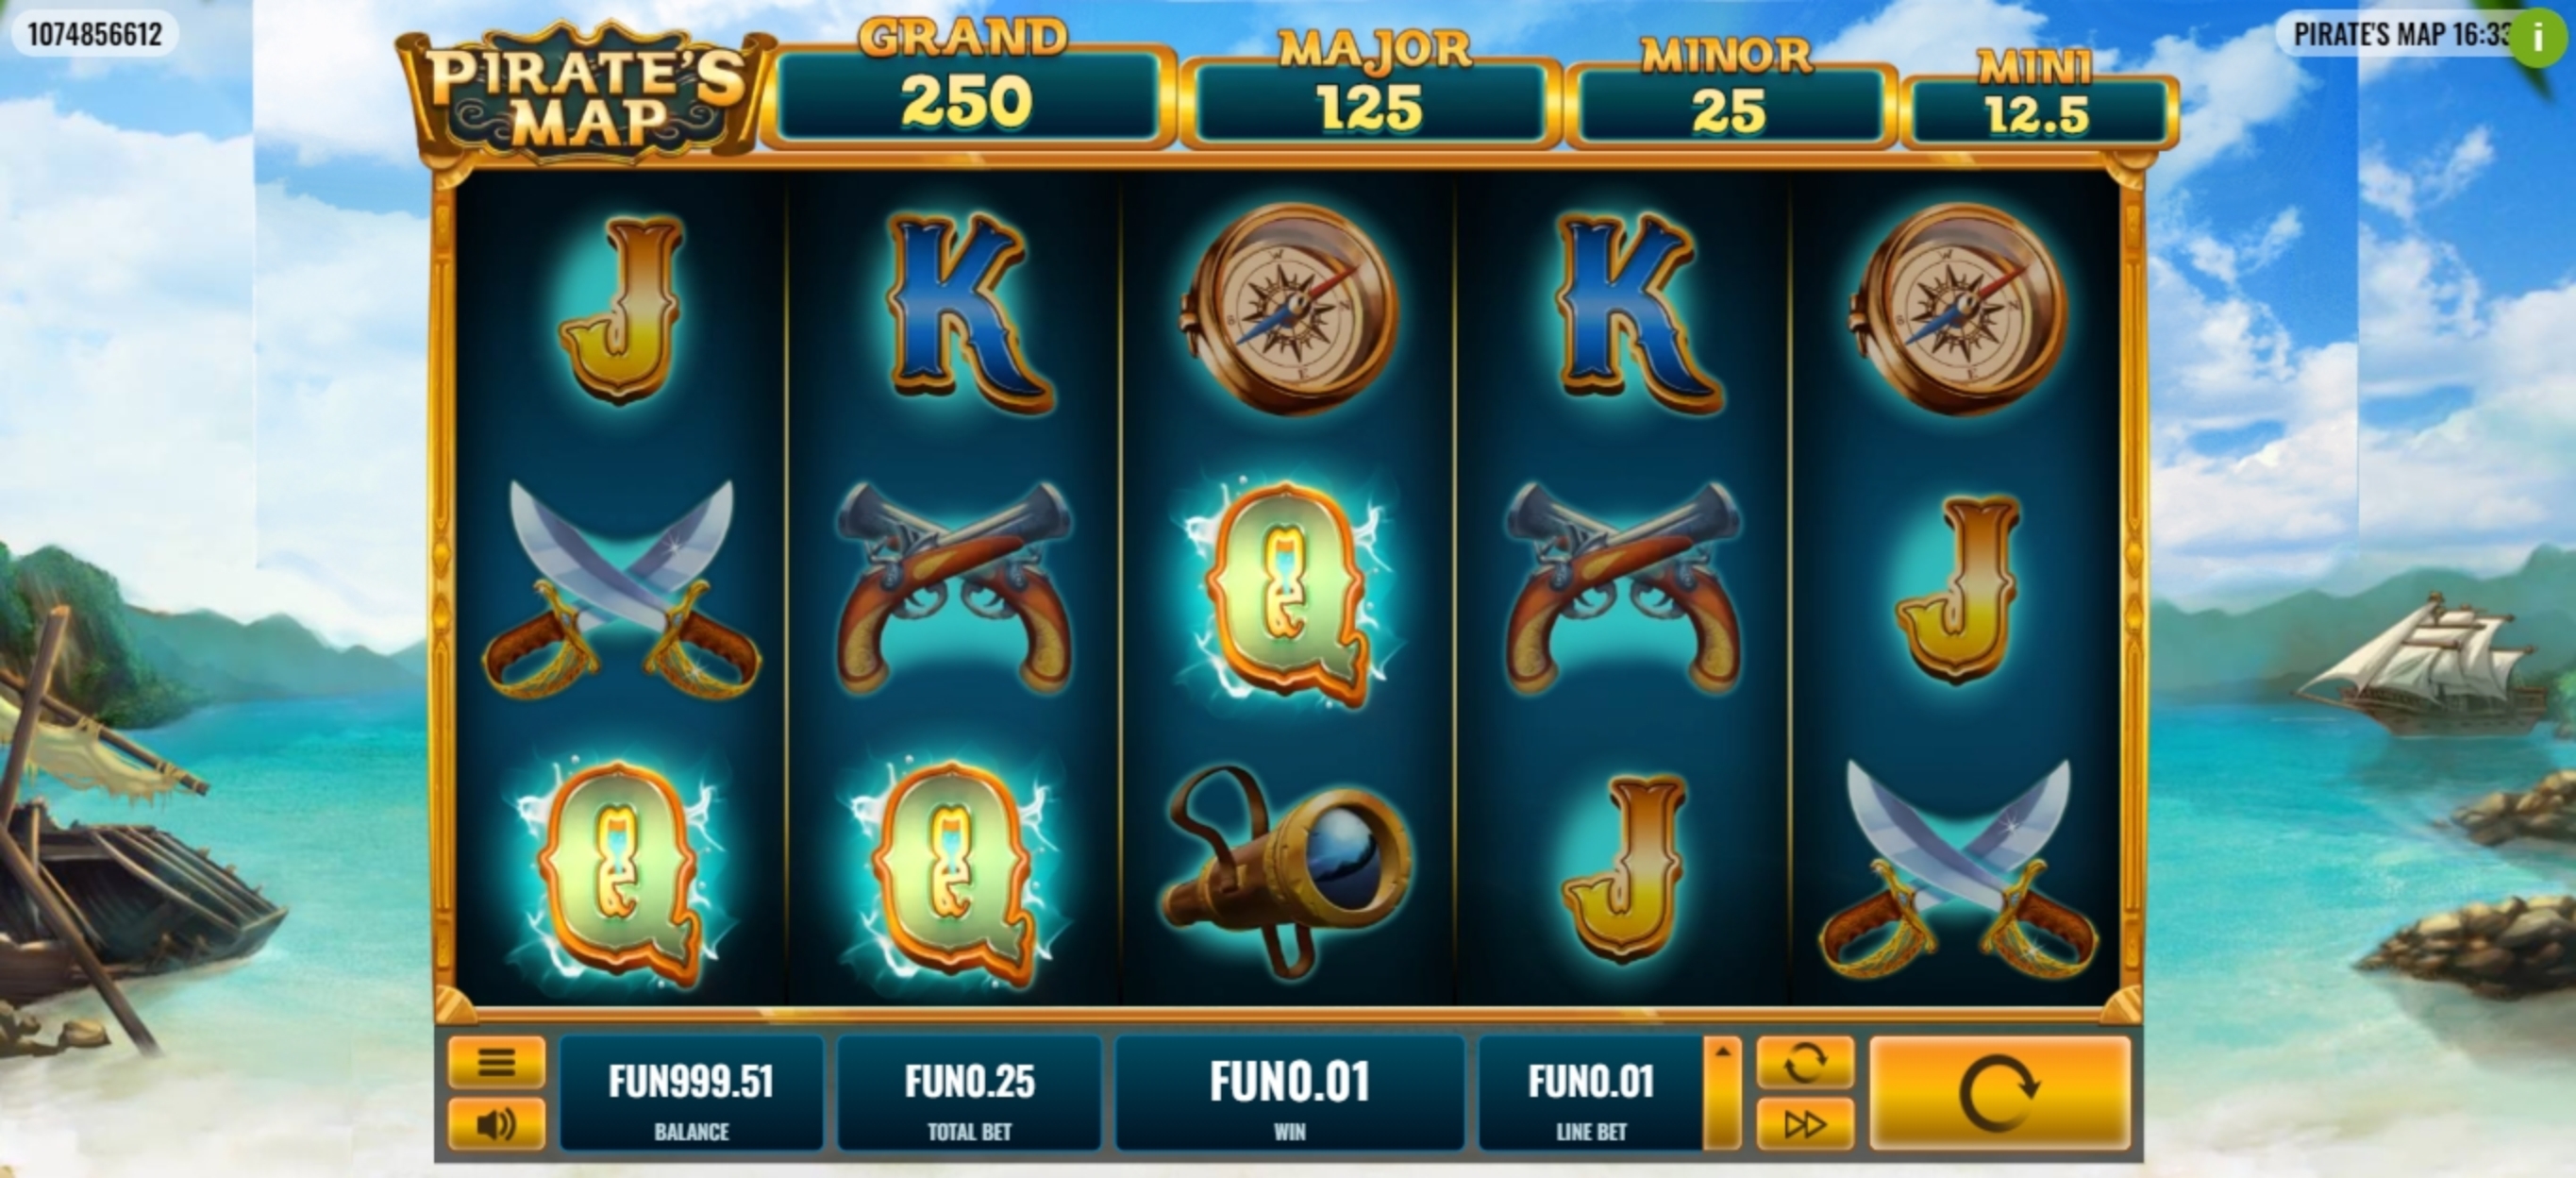 Win Money in Pirate's Map Free Slot Game by Platipus